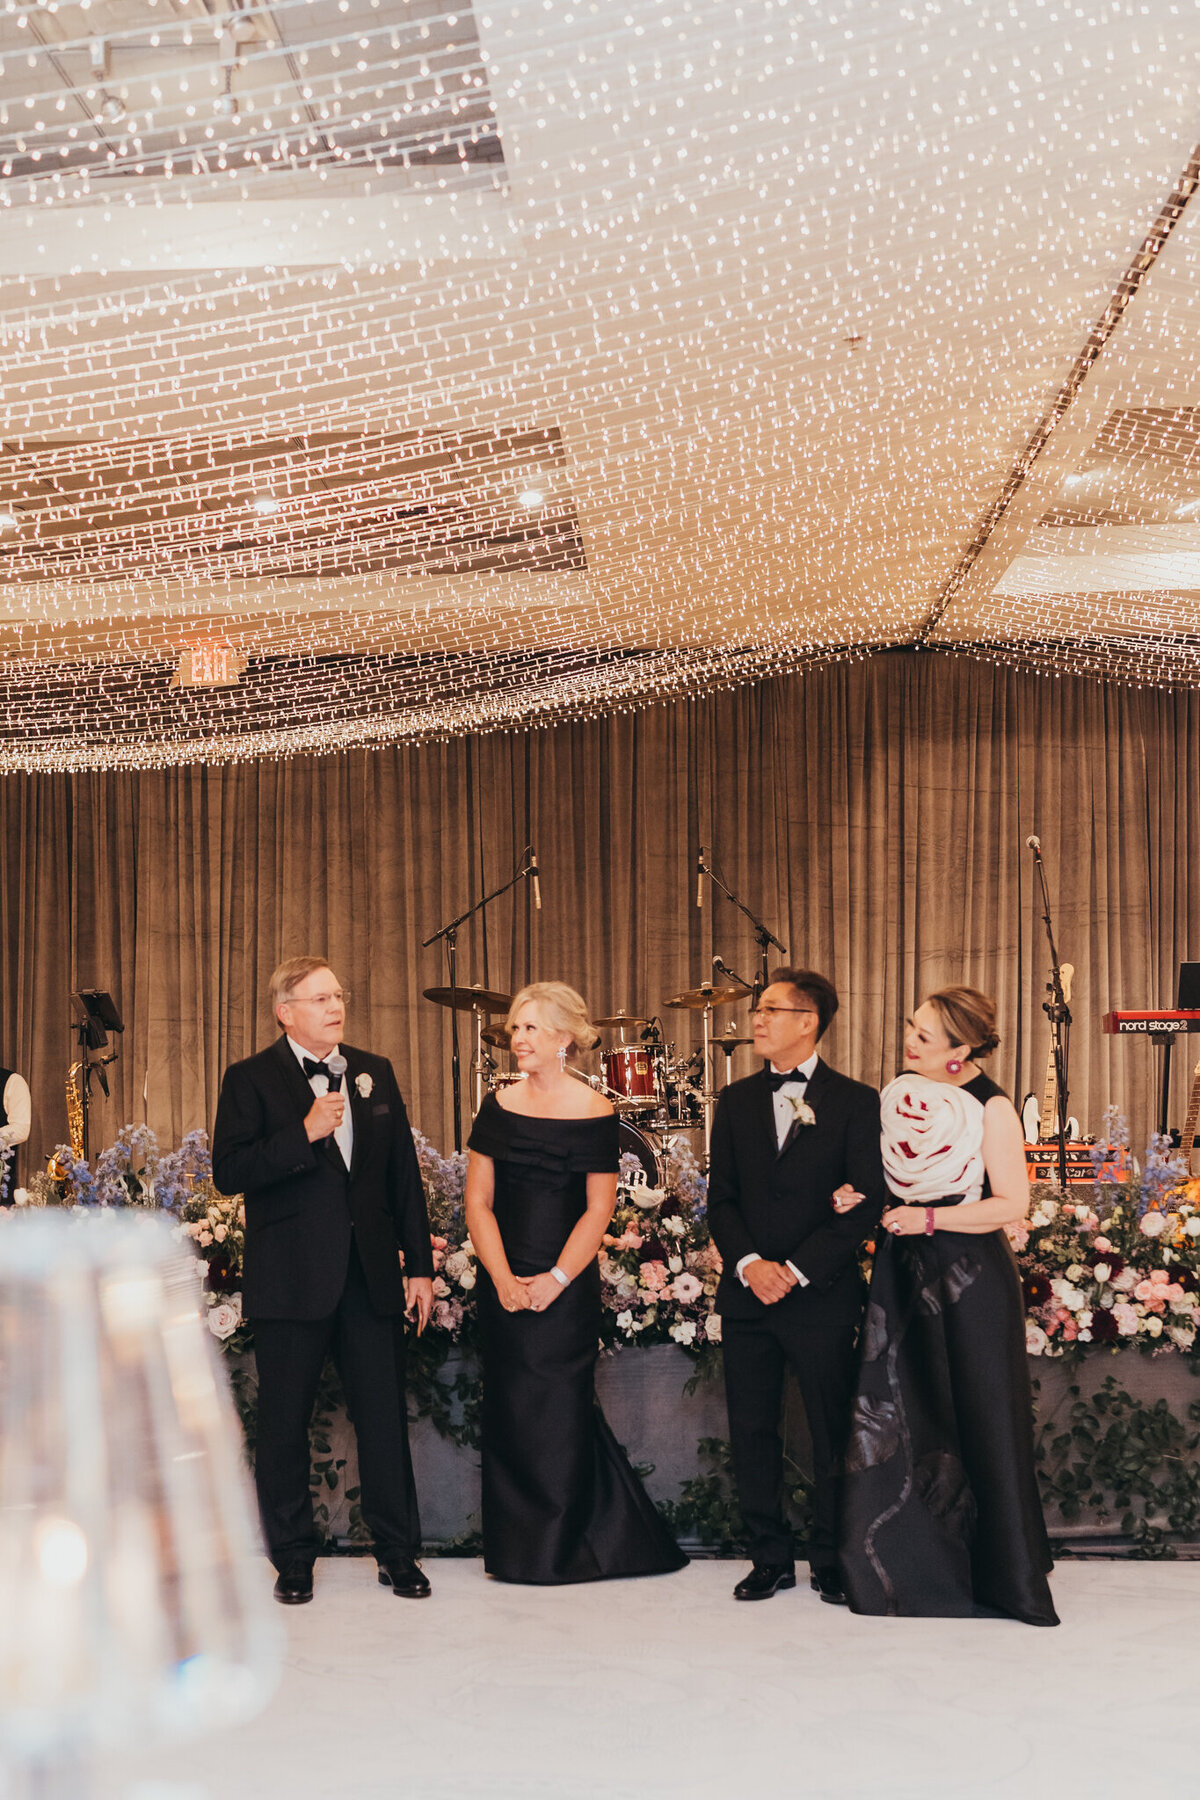 paretns of the newlyweds share toasts celebrating their children